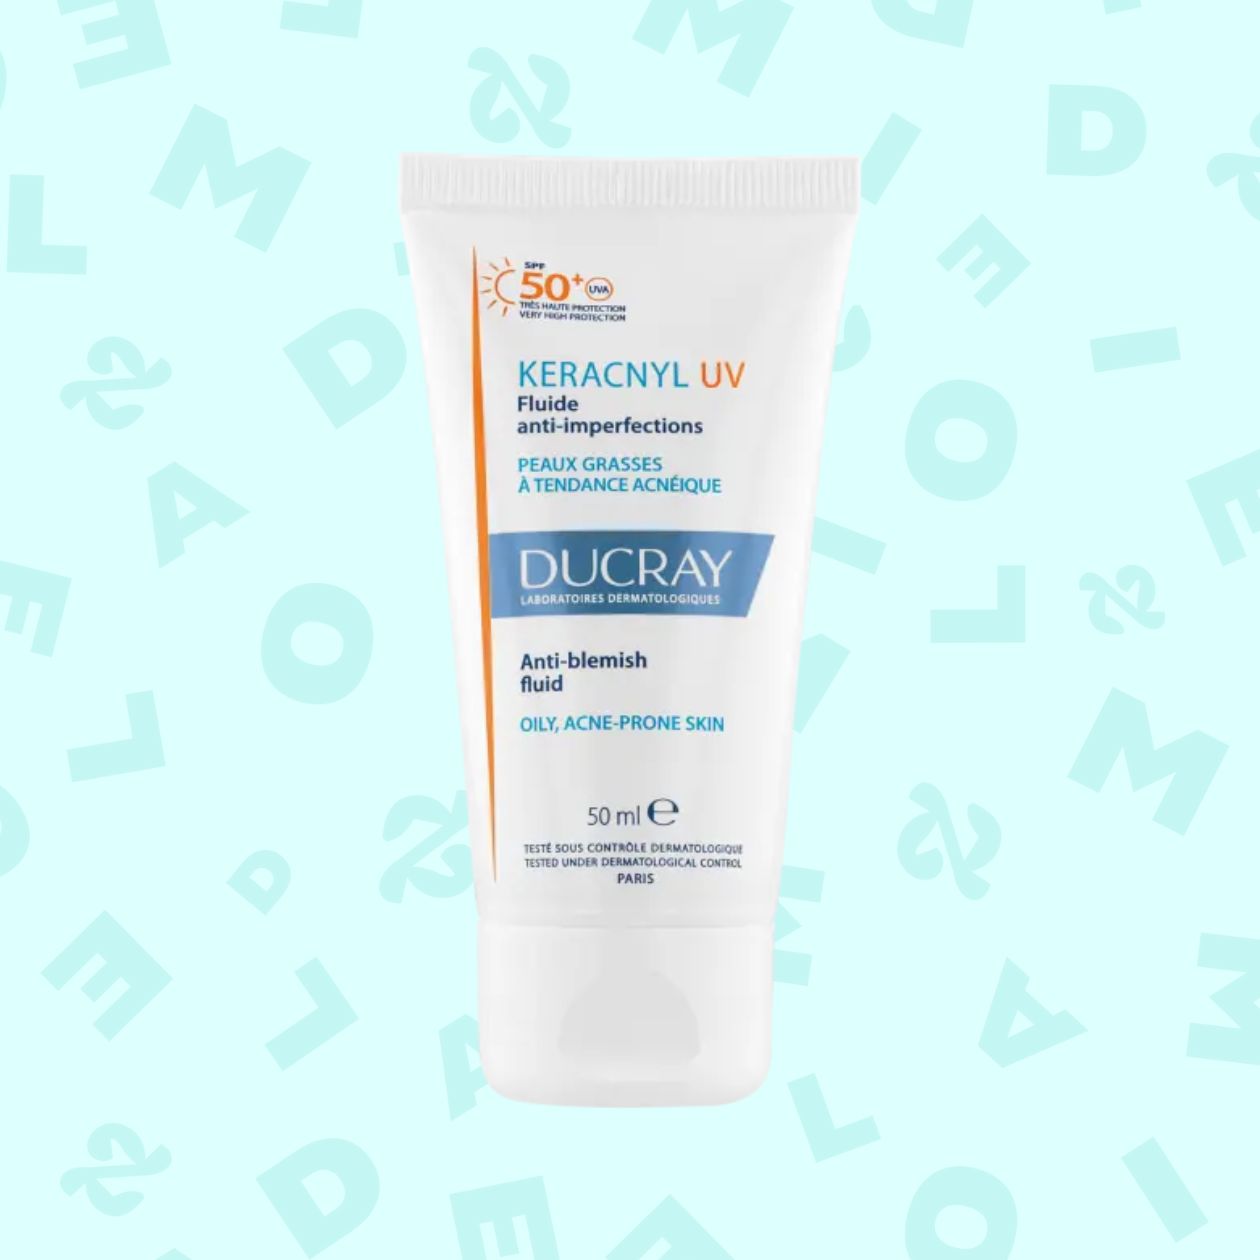 Fluide anti-imperfections Keracnyl UV — Ducray